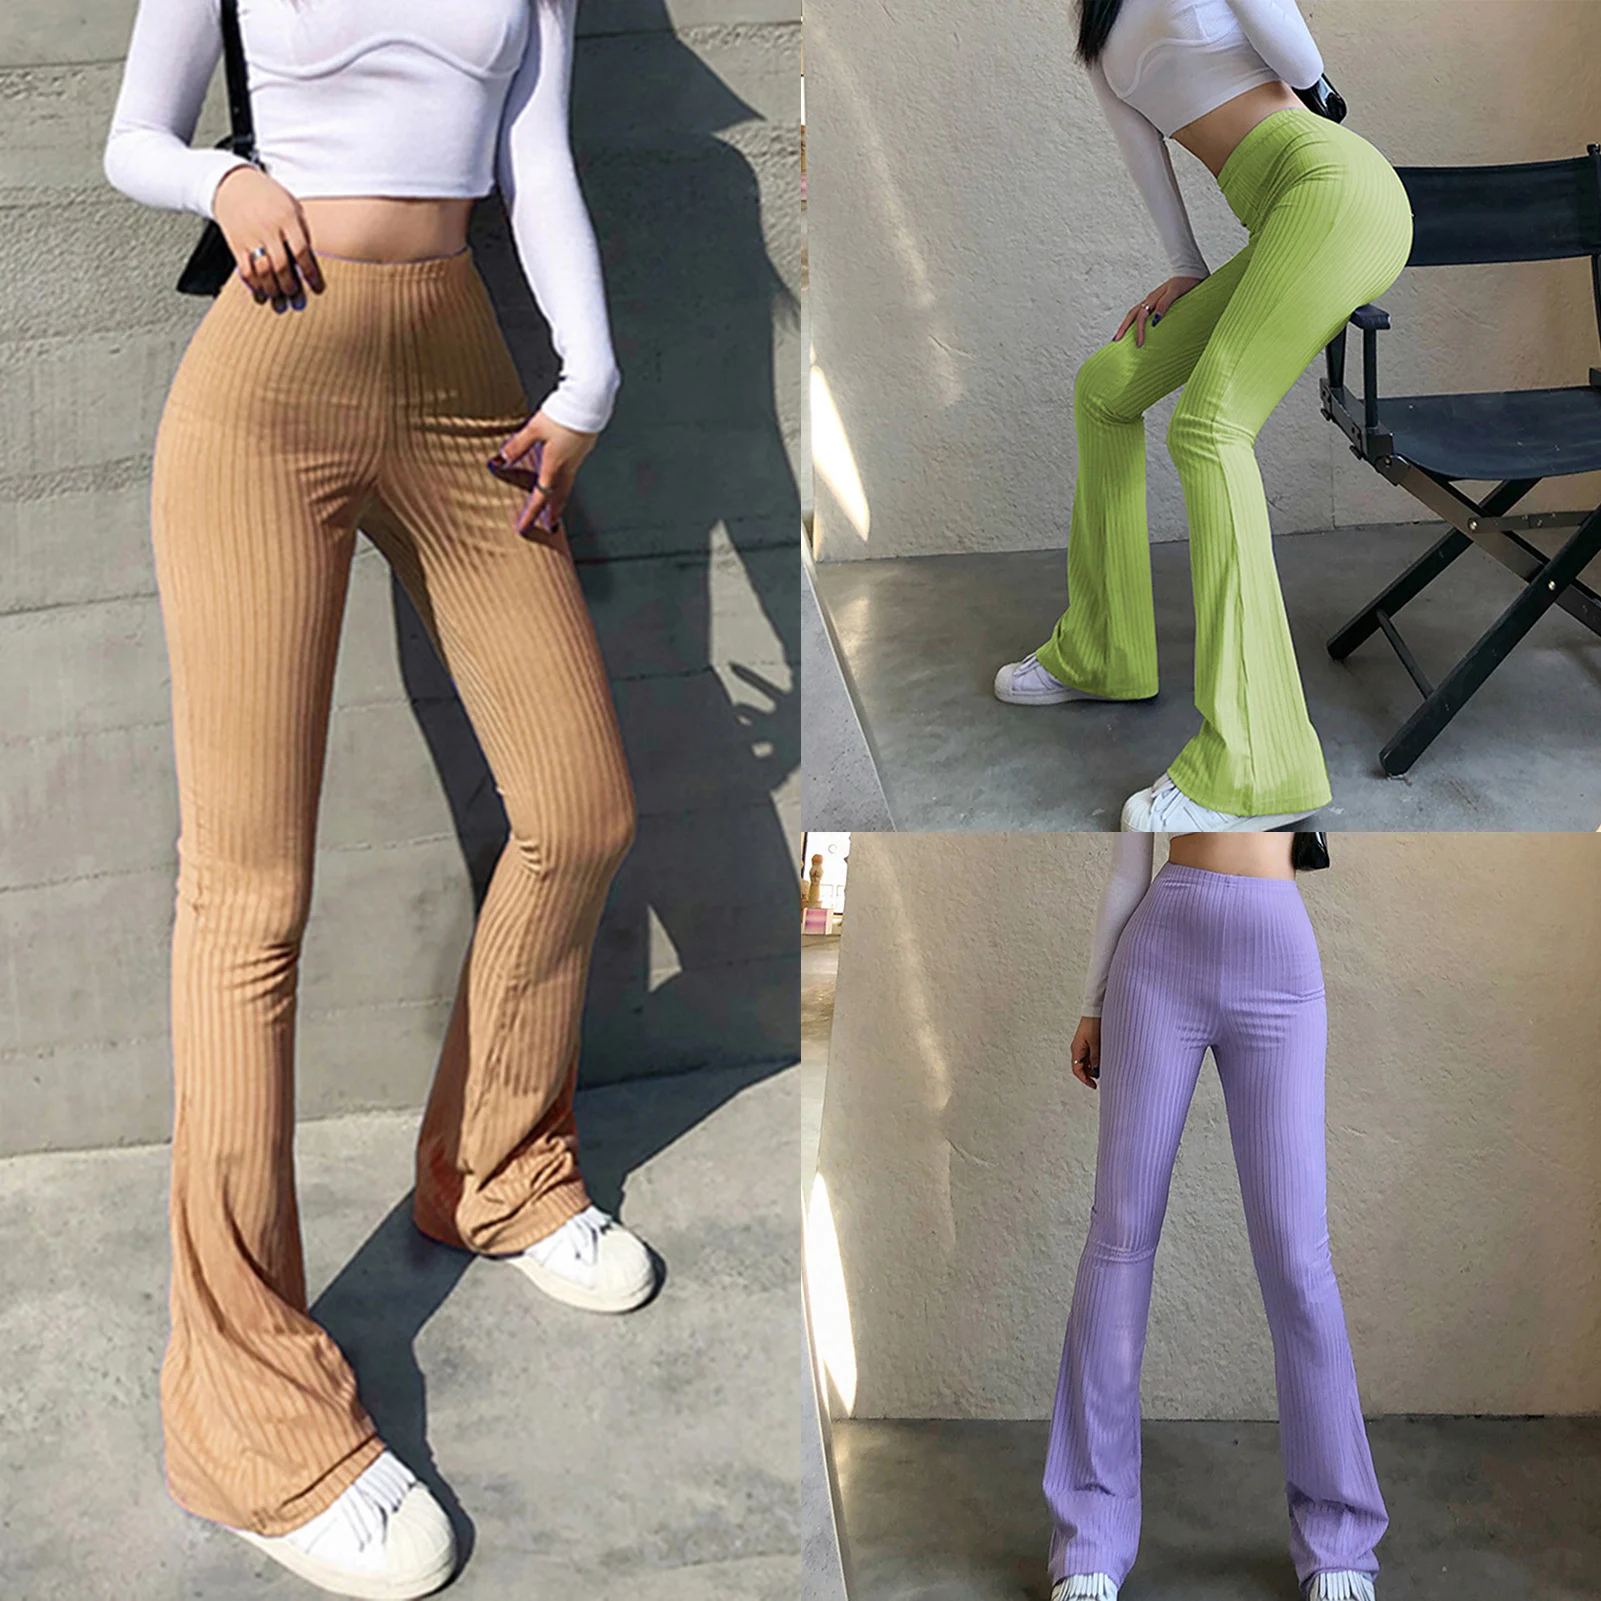 Women Elastic Waist Pants Fashion Leisure Style Flare Leg Trousers Slim Fit Solid Color Skinny Pants Stripe Design Daily Outfit